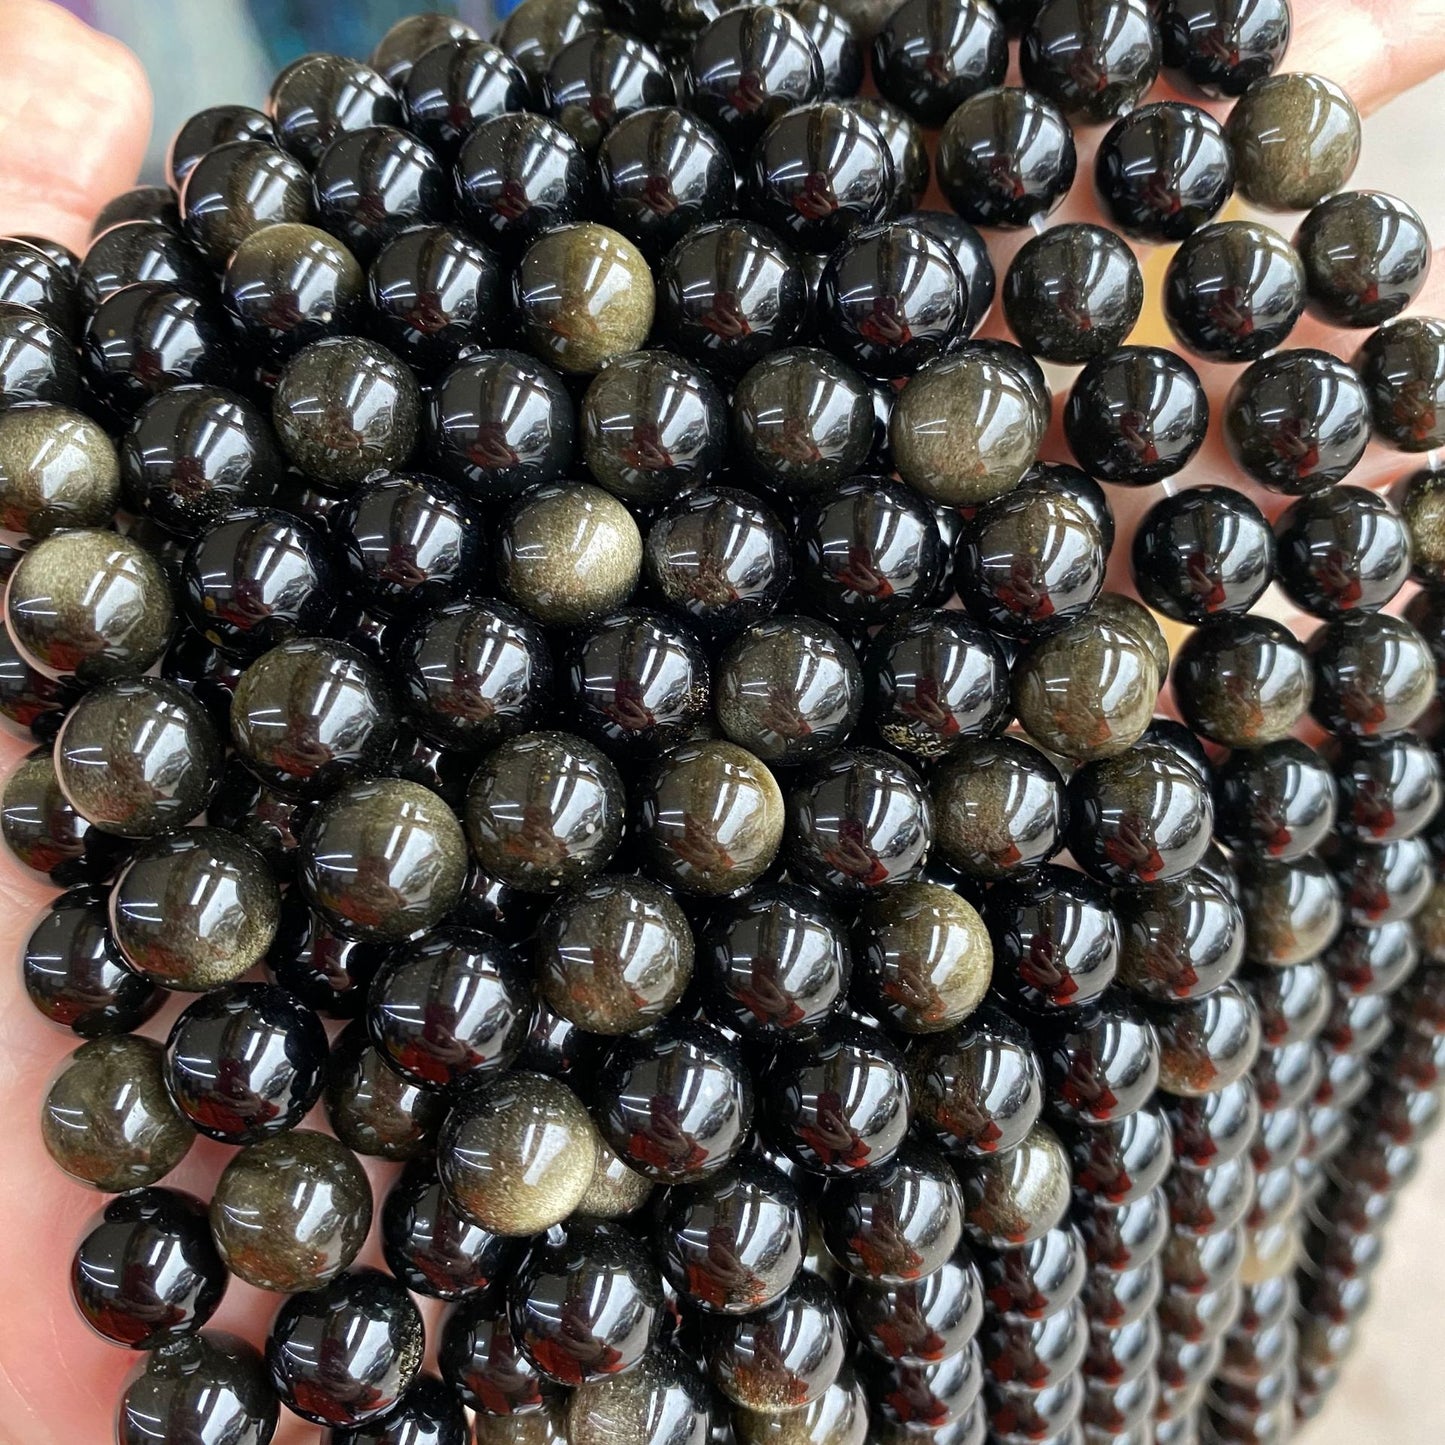 2 Strands/lot 10/12mm Gold Obsidian Stone Round Beads Stone Beads 12mm Stone Beads New Beads Arrivals Other Stone Beads Charms Beads Beyond